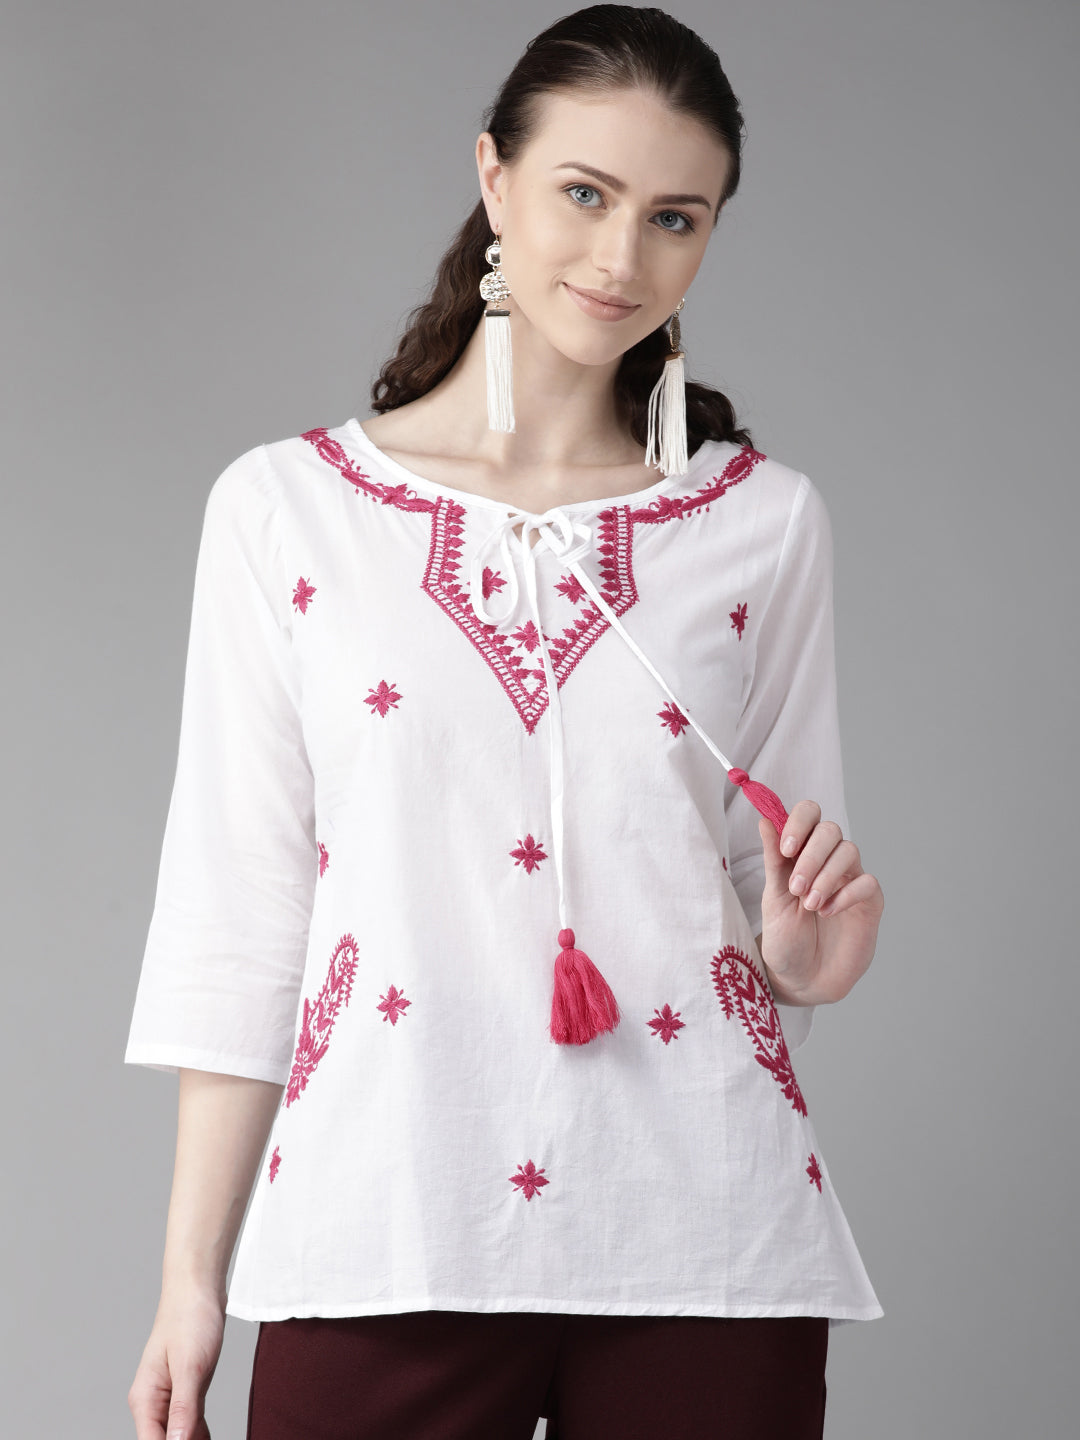 Bhama Couture Embroidered Top